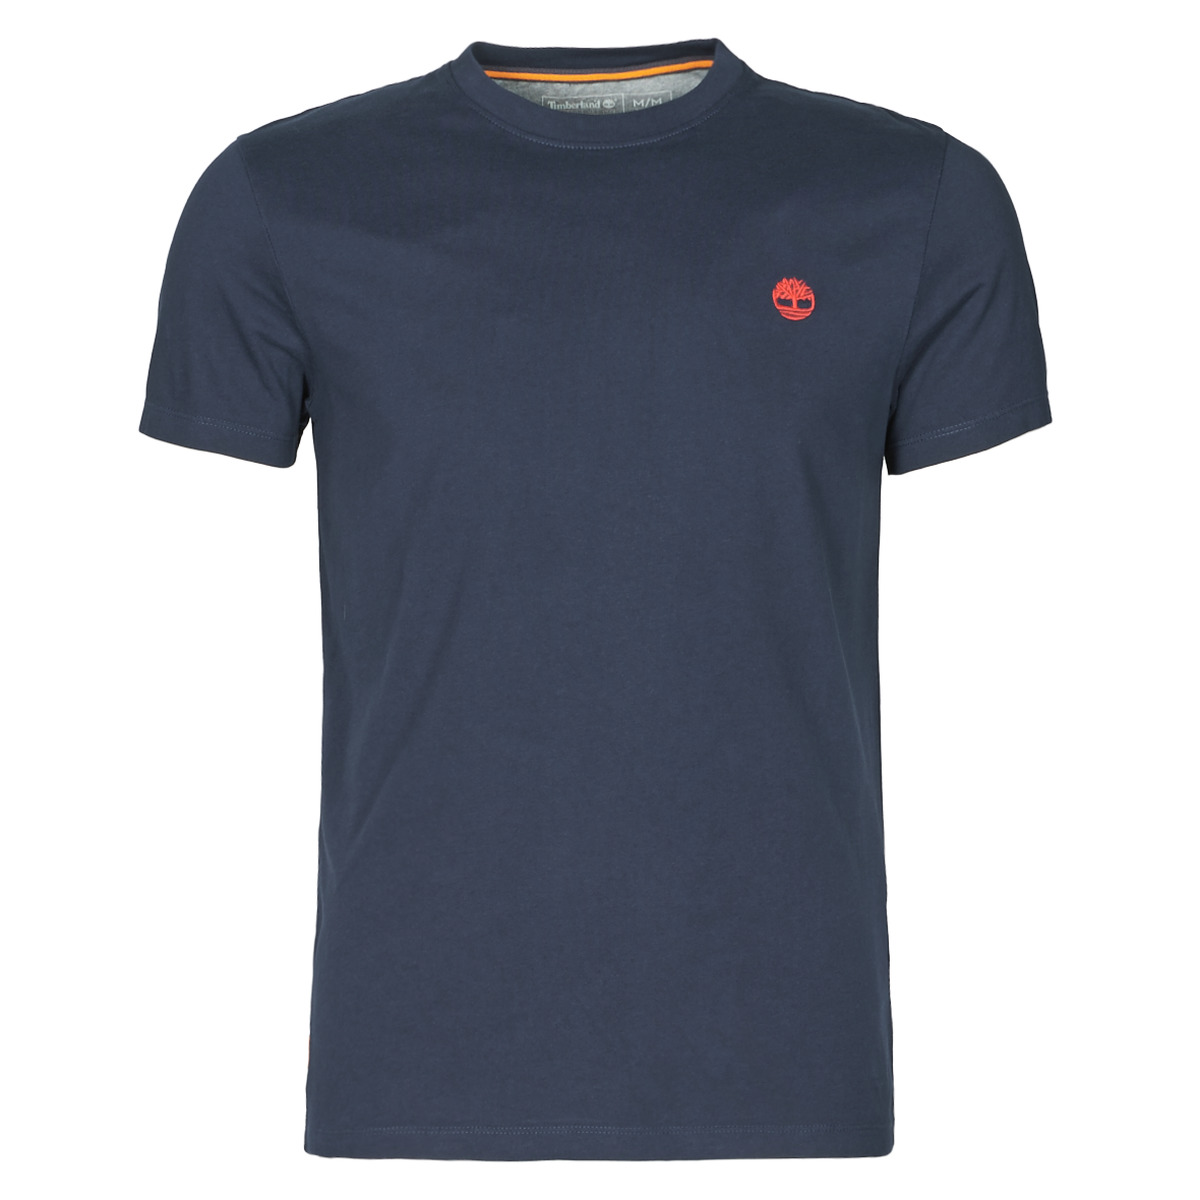 Timberland SS DUNSTAN RIVER POCKET TEE SLIM Marine - Fast delivery |  Spartoo Europe ! - Clothing short-sleeved t-shirts Men 33,00 € | Sport-T-Shirts